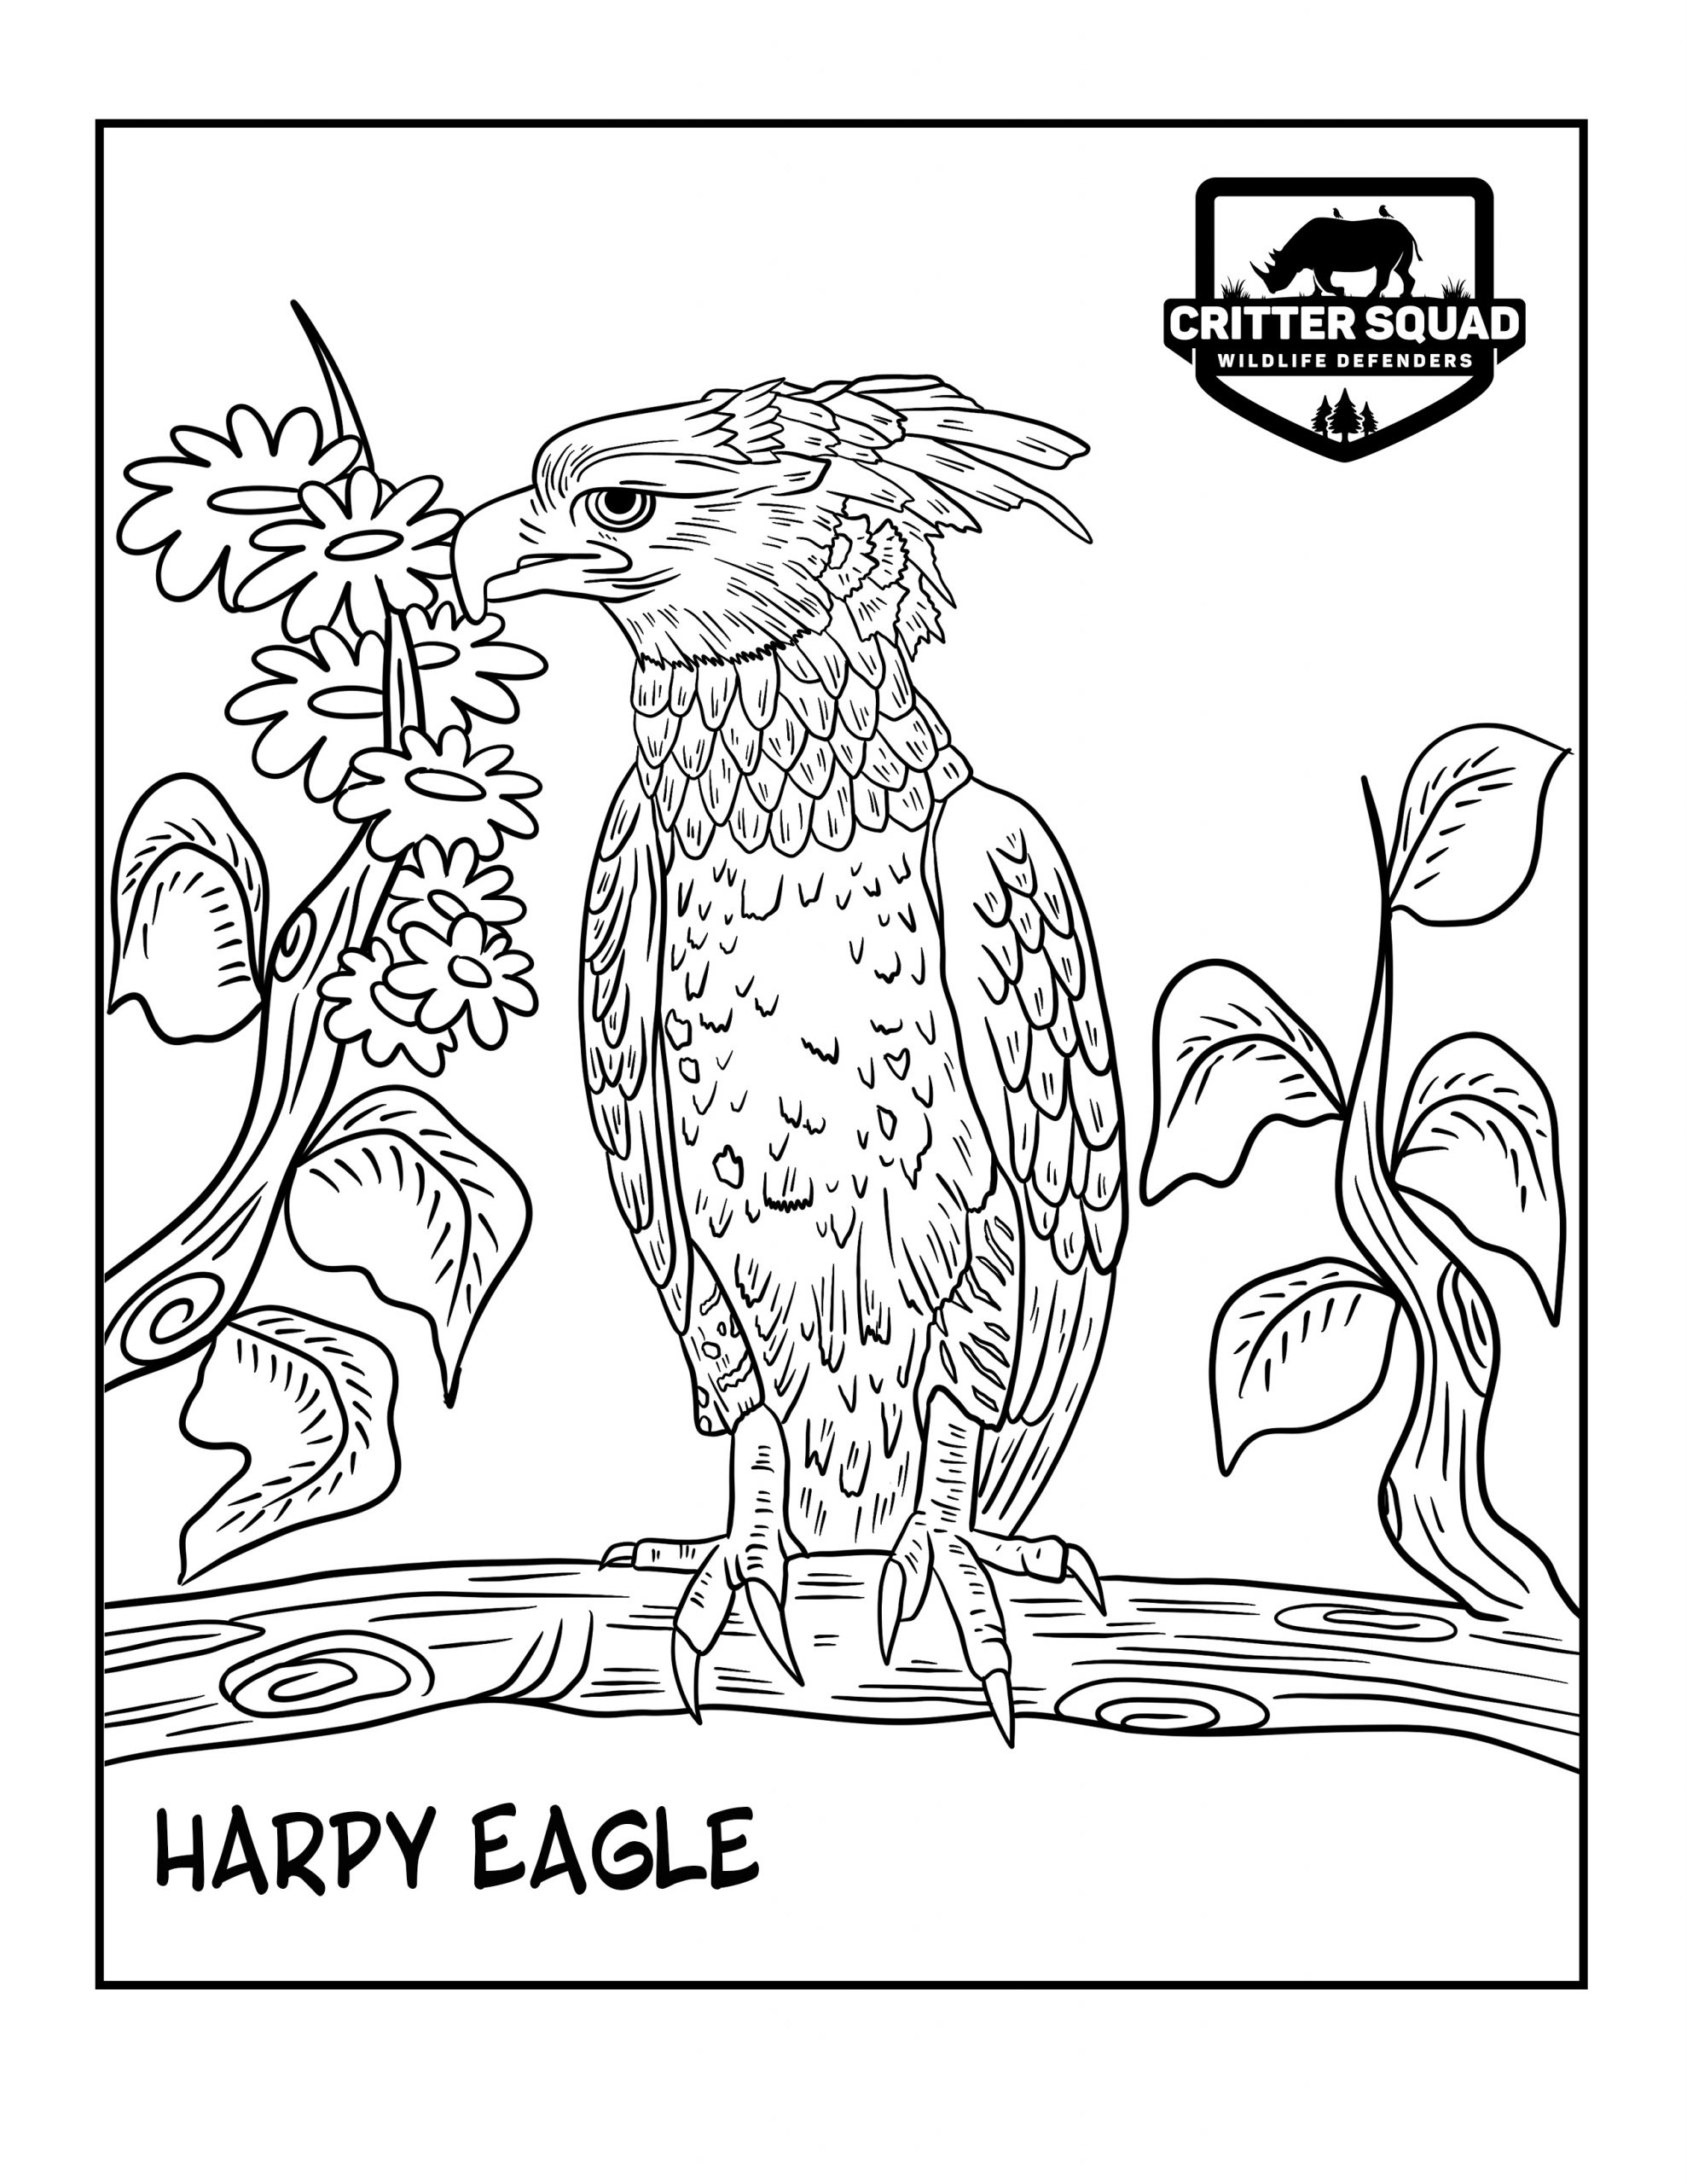 Harpy eagle coloring page